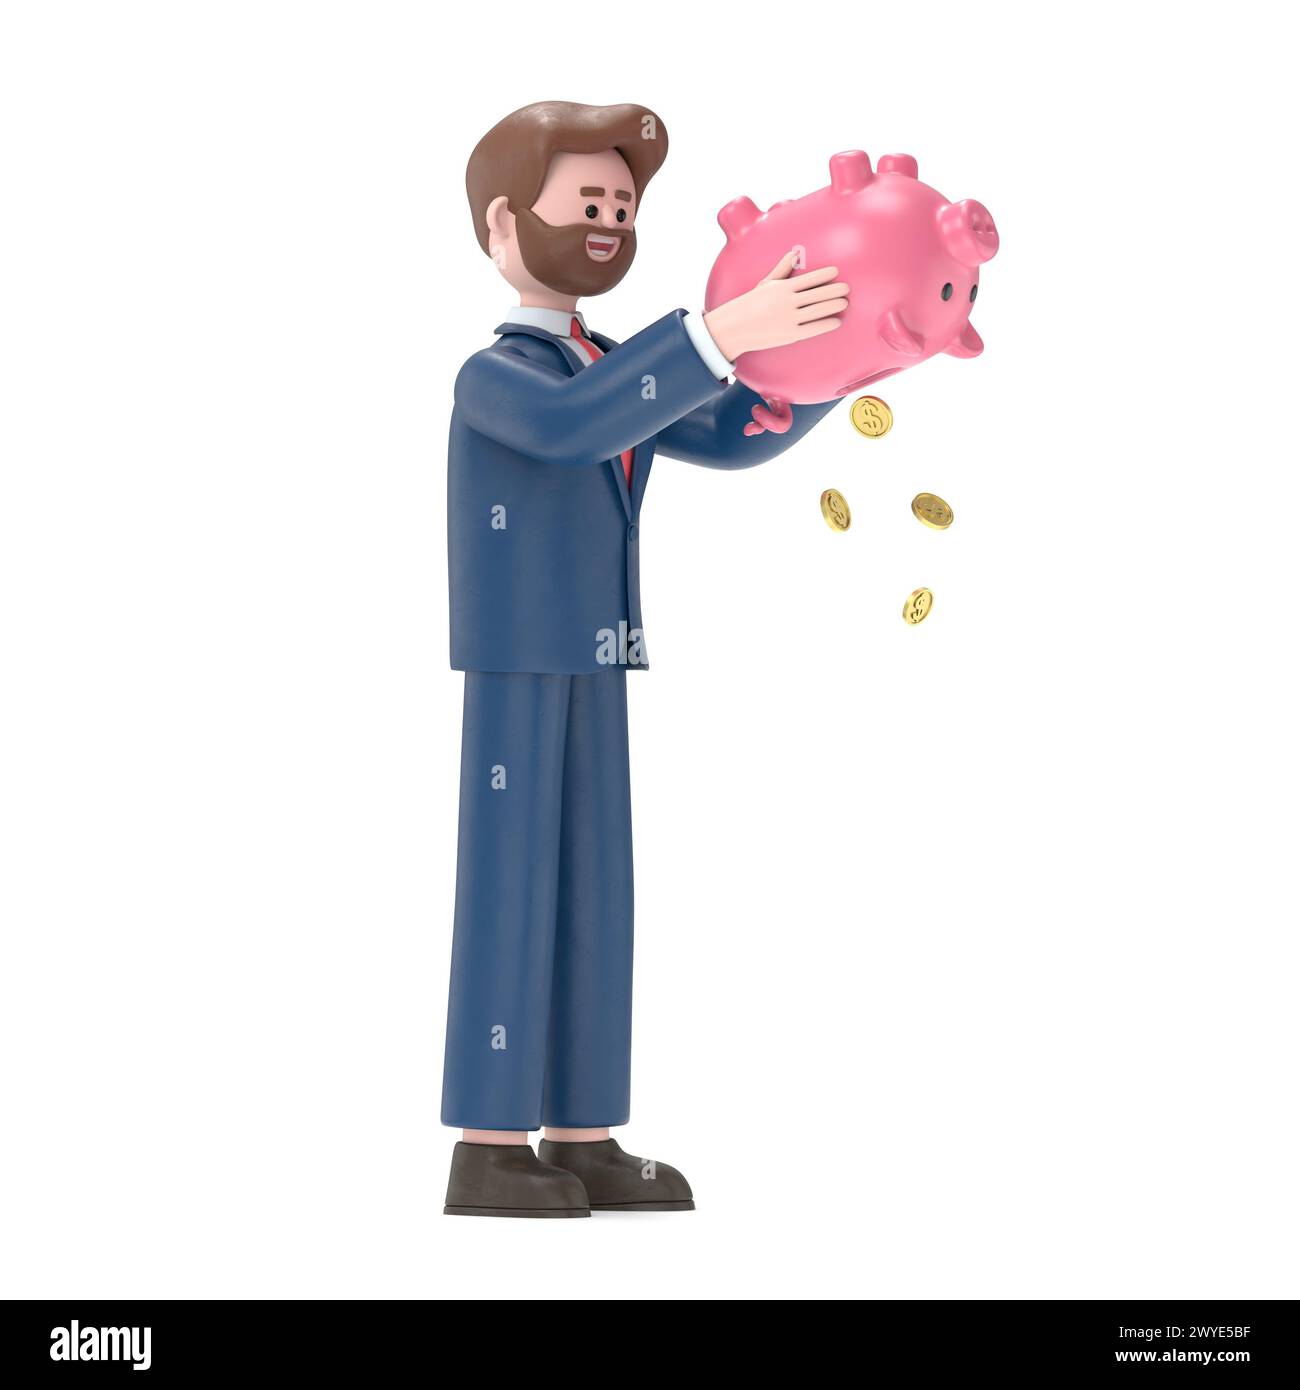 3D illustration of businessman with piggy bank. Financial crisis concept, 3D illustration in cartoon style design.3D rendering on white background Stock Photo